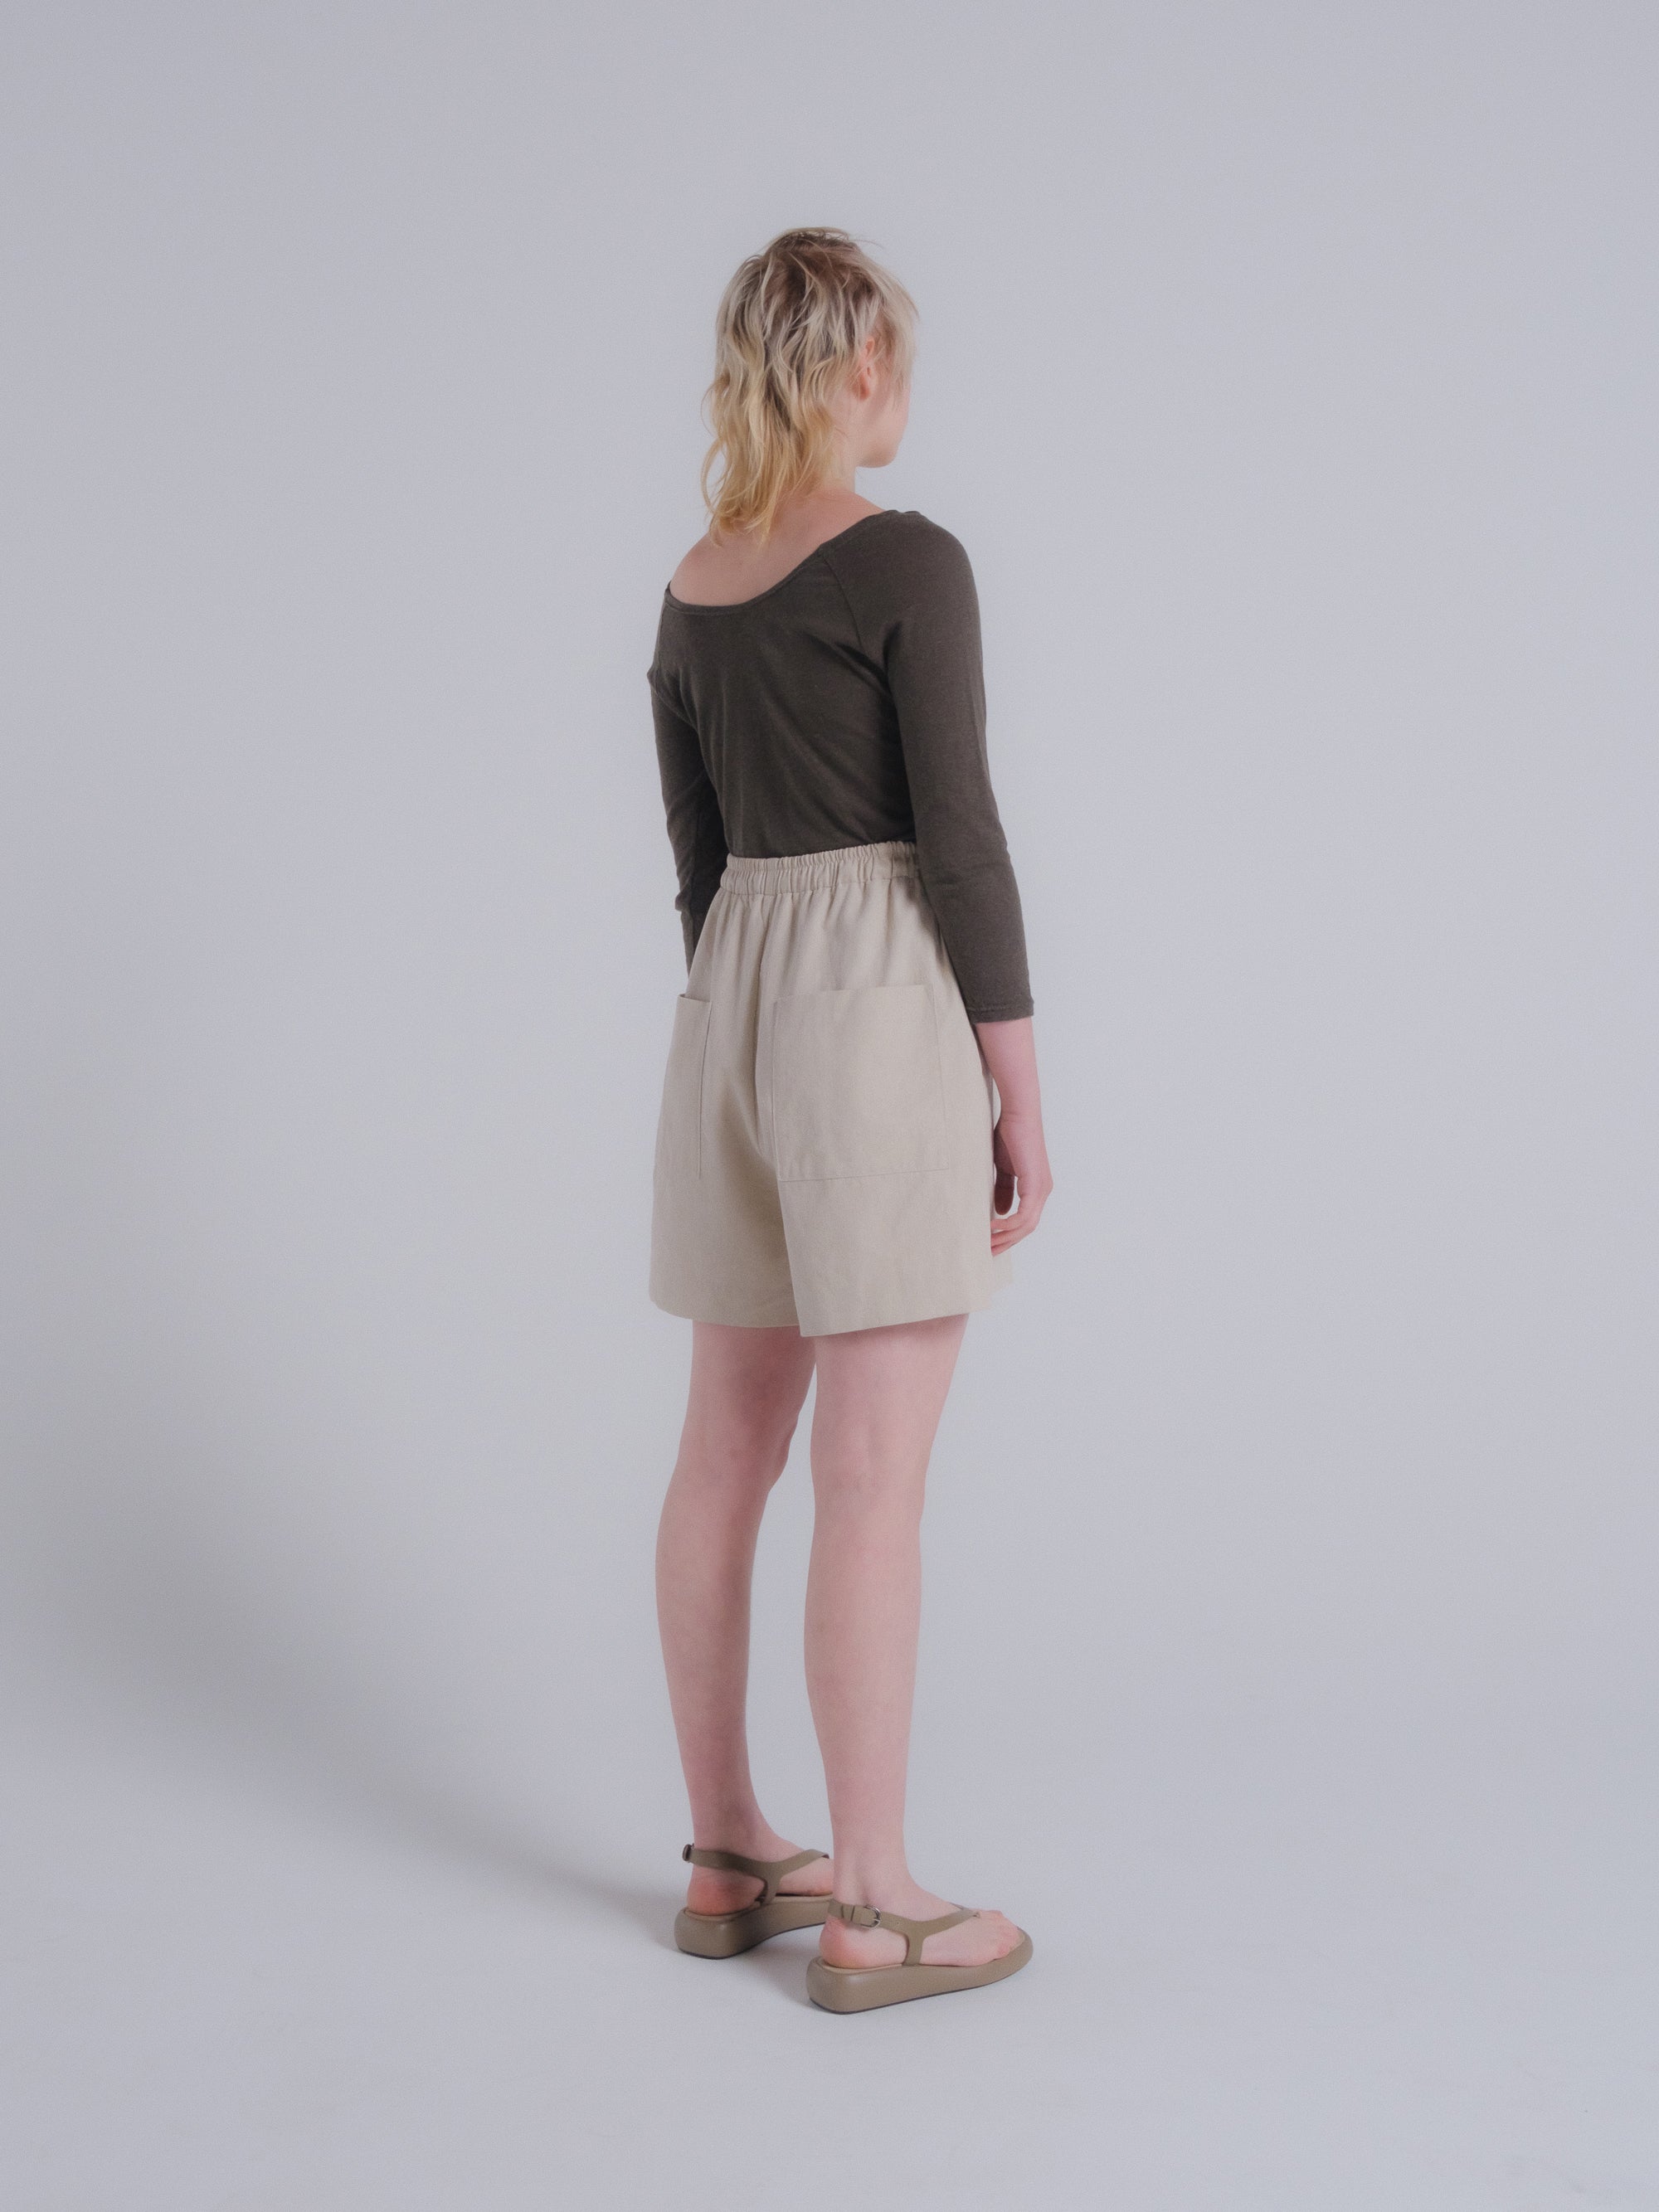 Marlo Short in Natural Twill